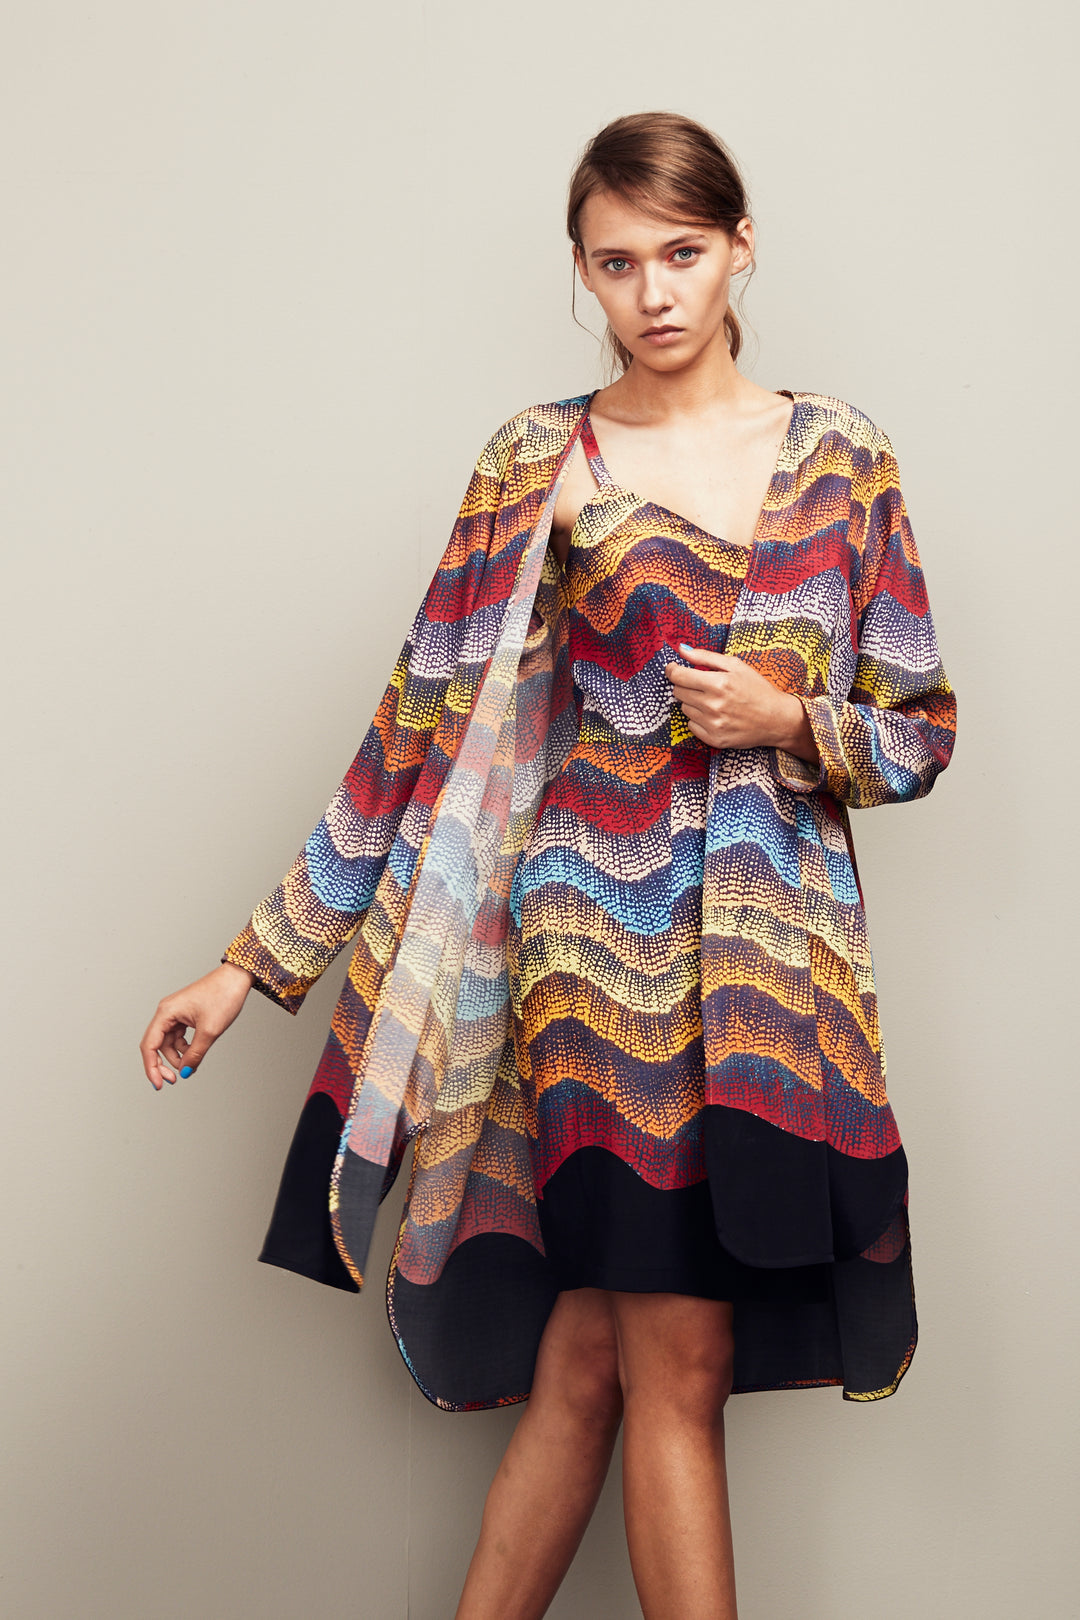 Indigenous Wavy Printed Outercoat